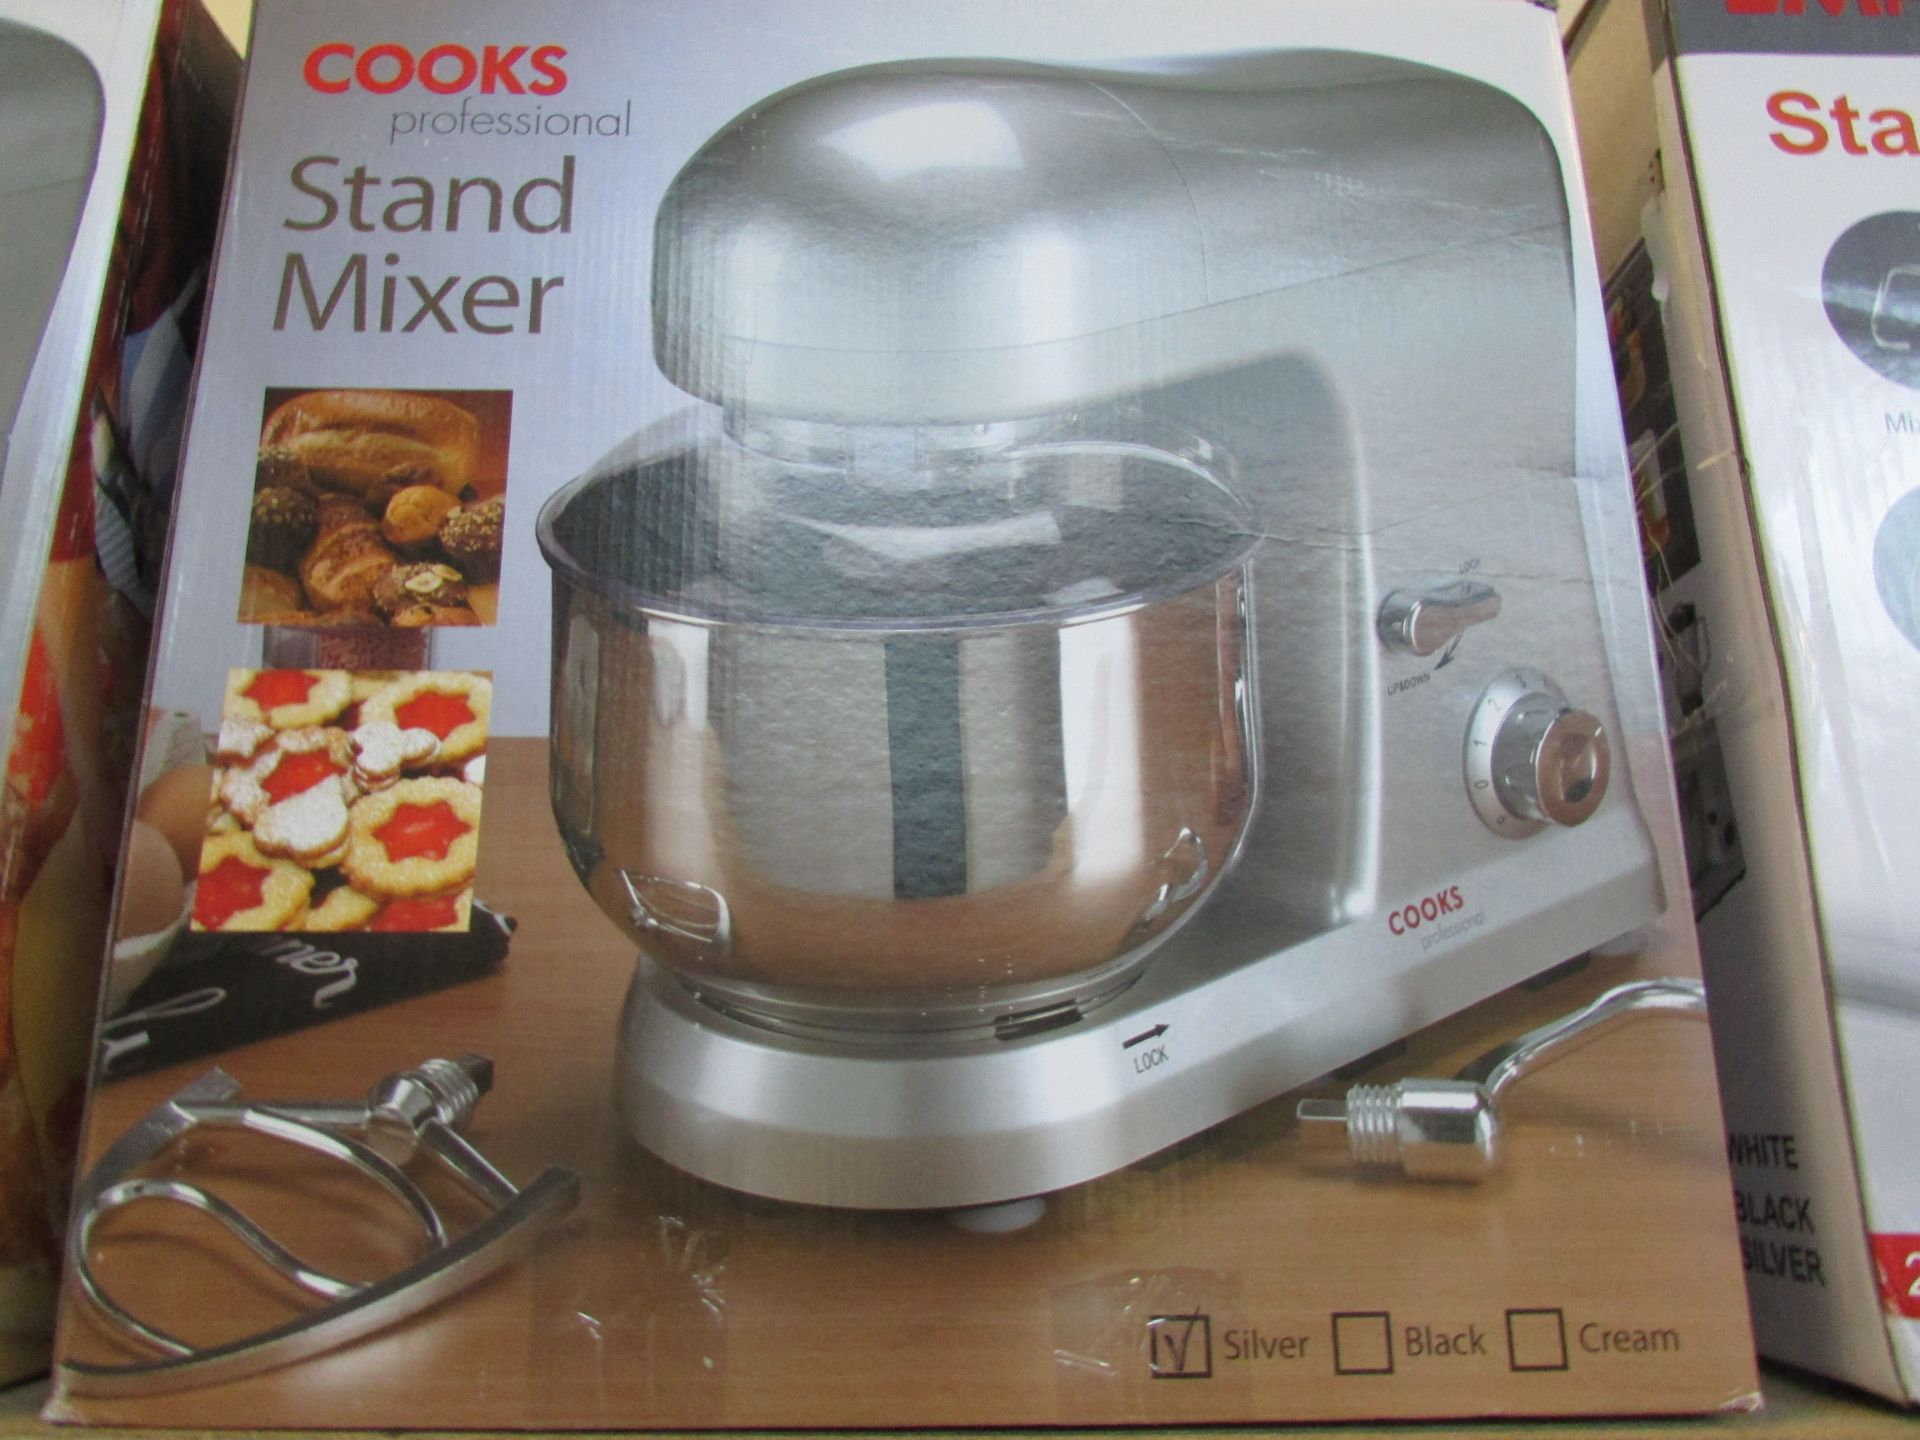 COOKS STAND MIXER 5 LITRE MIX BOWL VARIABLE SPEED SETTINGS